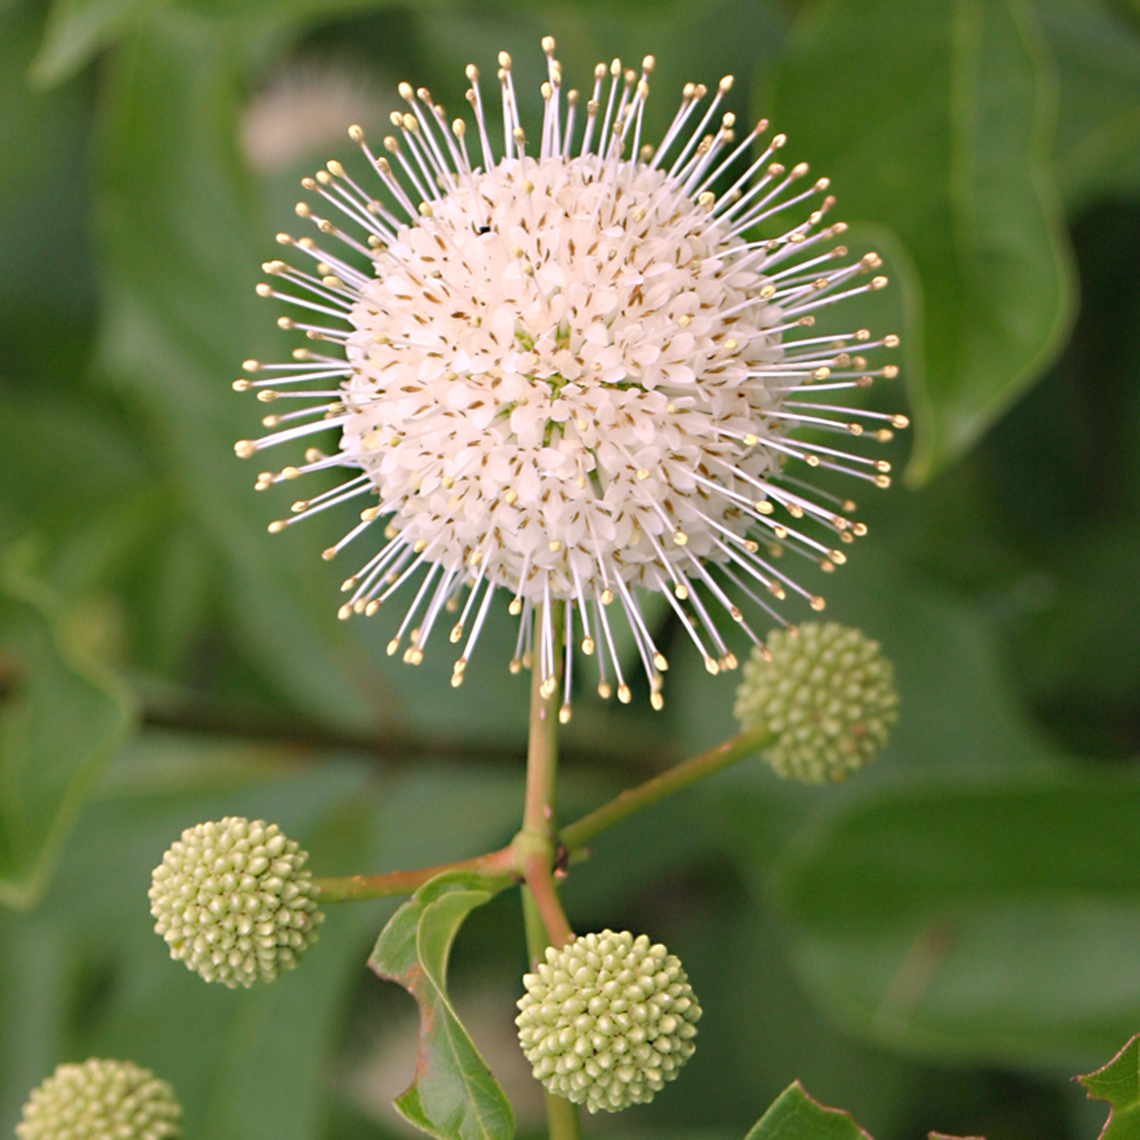 close up of a pinkish-white Spherical flower of the Cephalanthus Sputnik